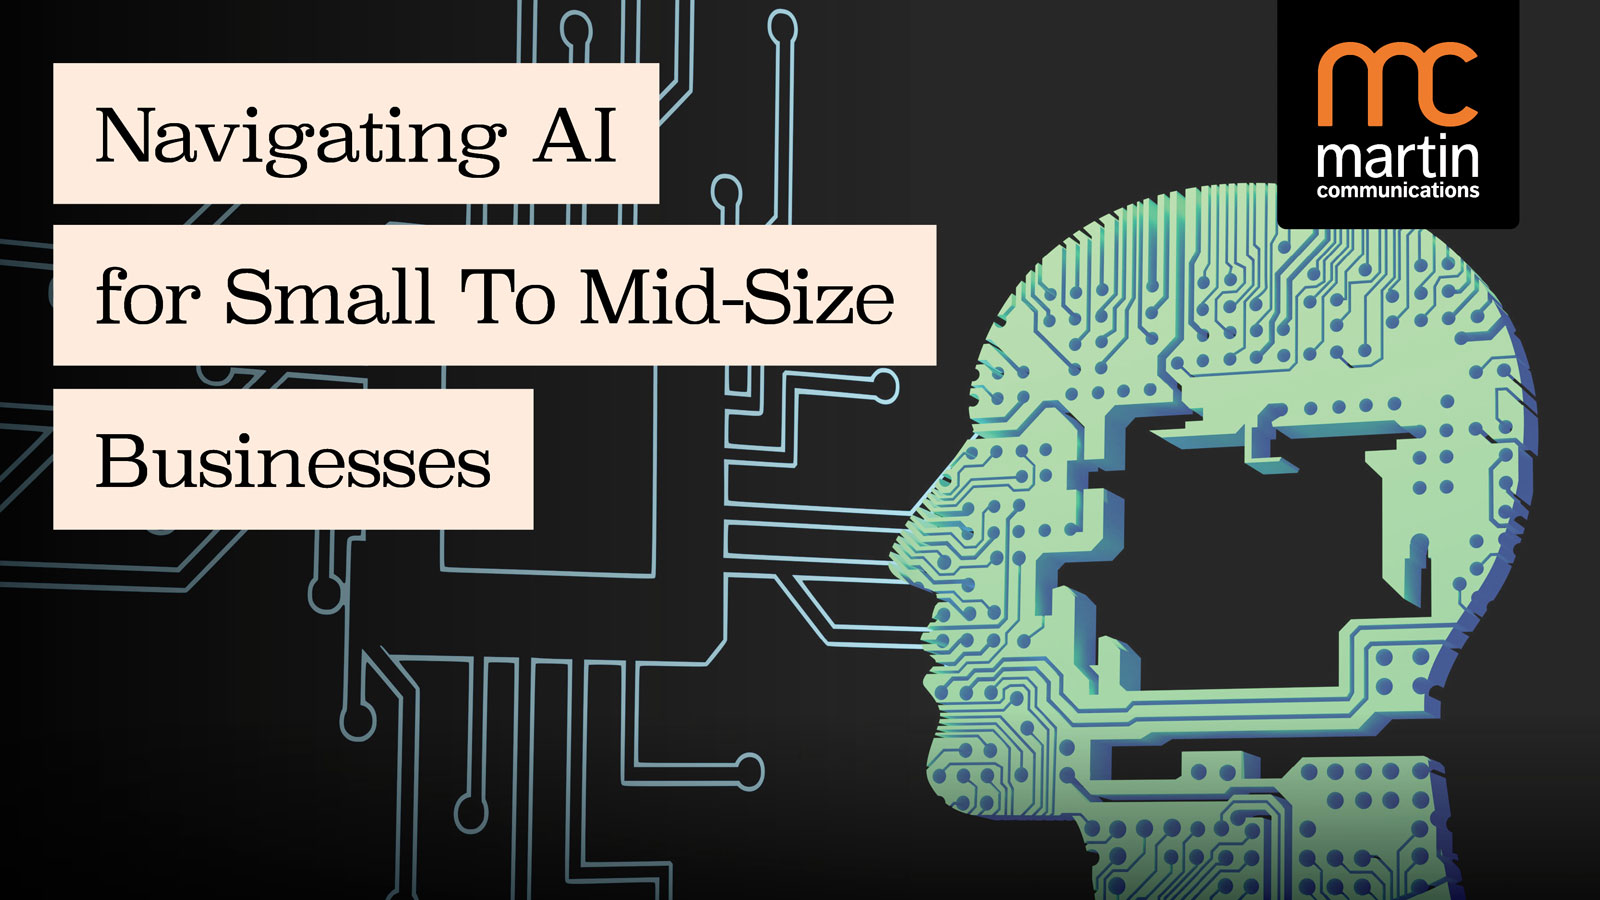 Navigating AI for Small to Mid-Size Businesses - Martin Communications, Inc.